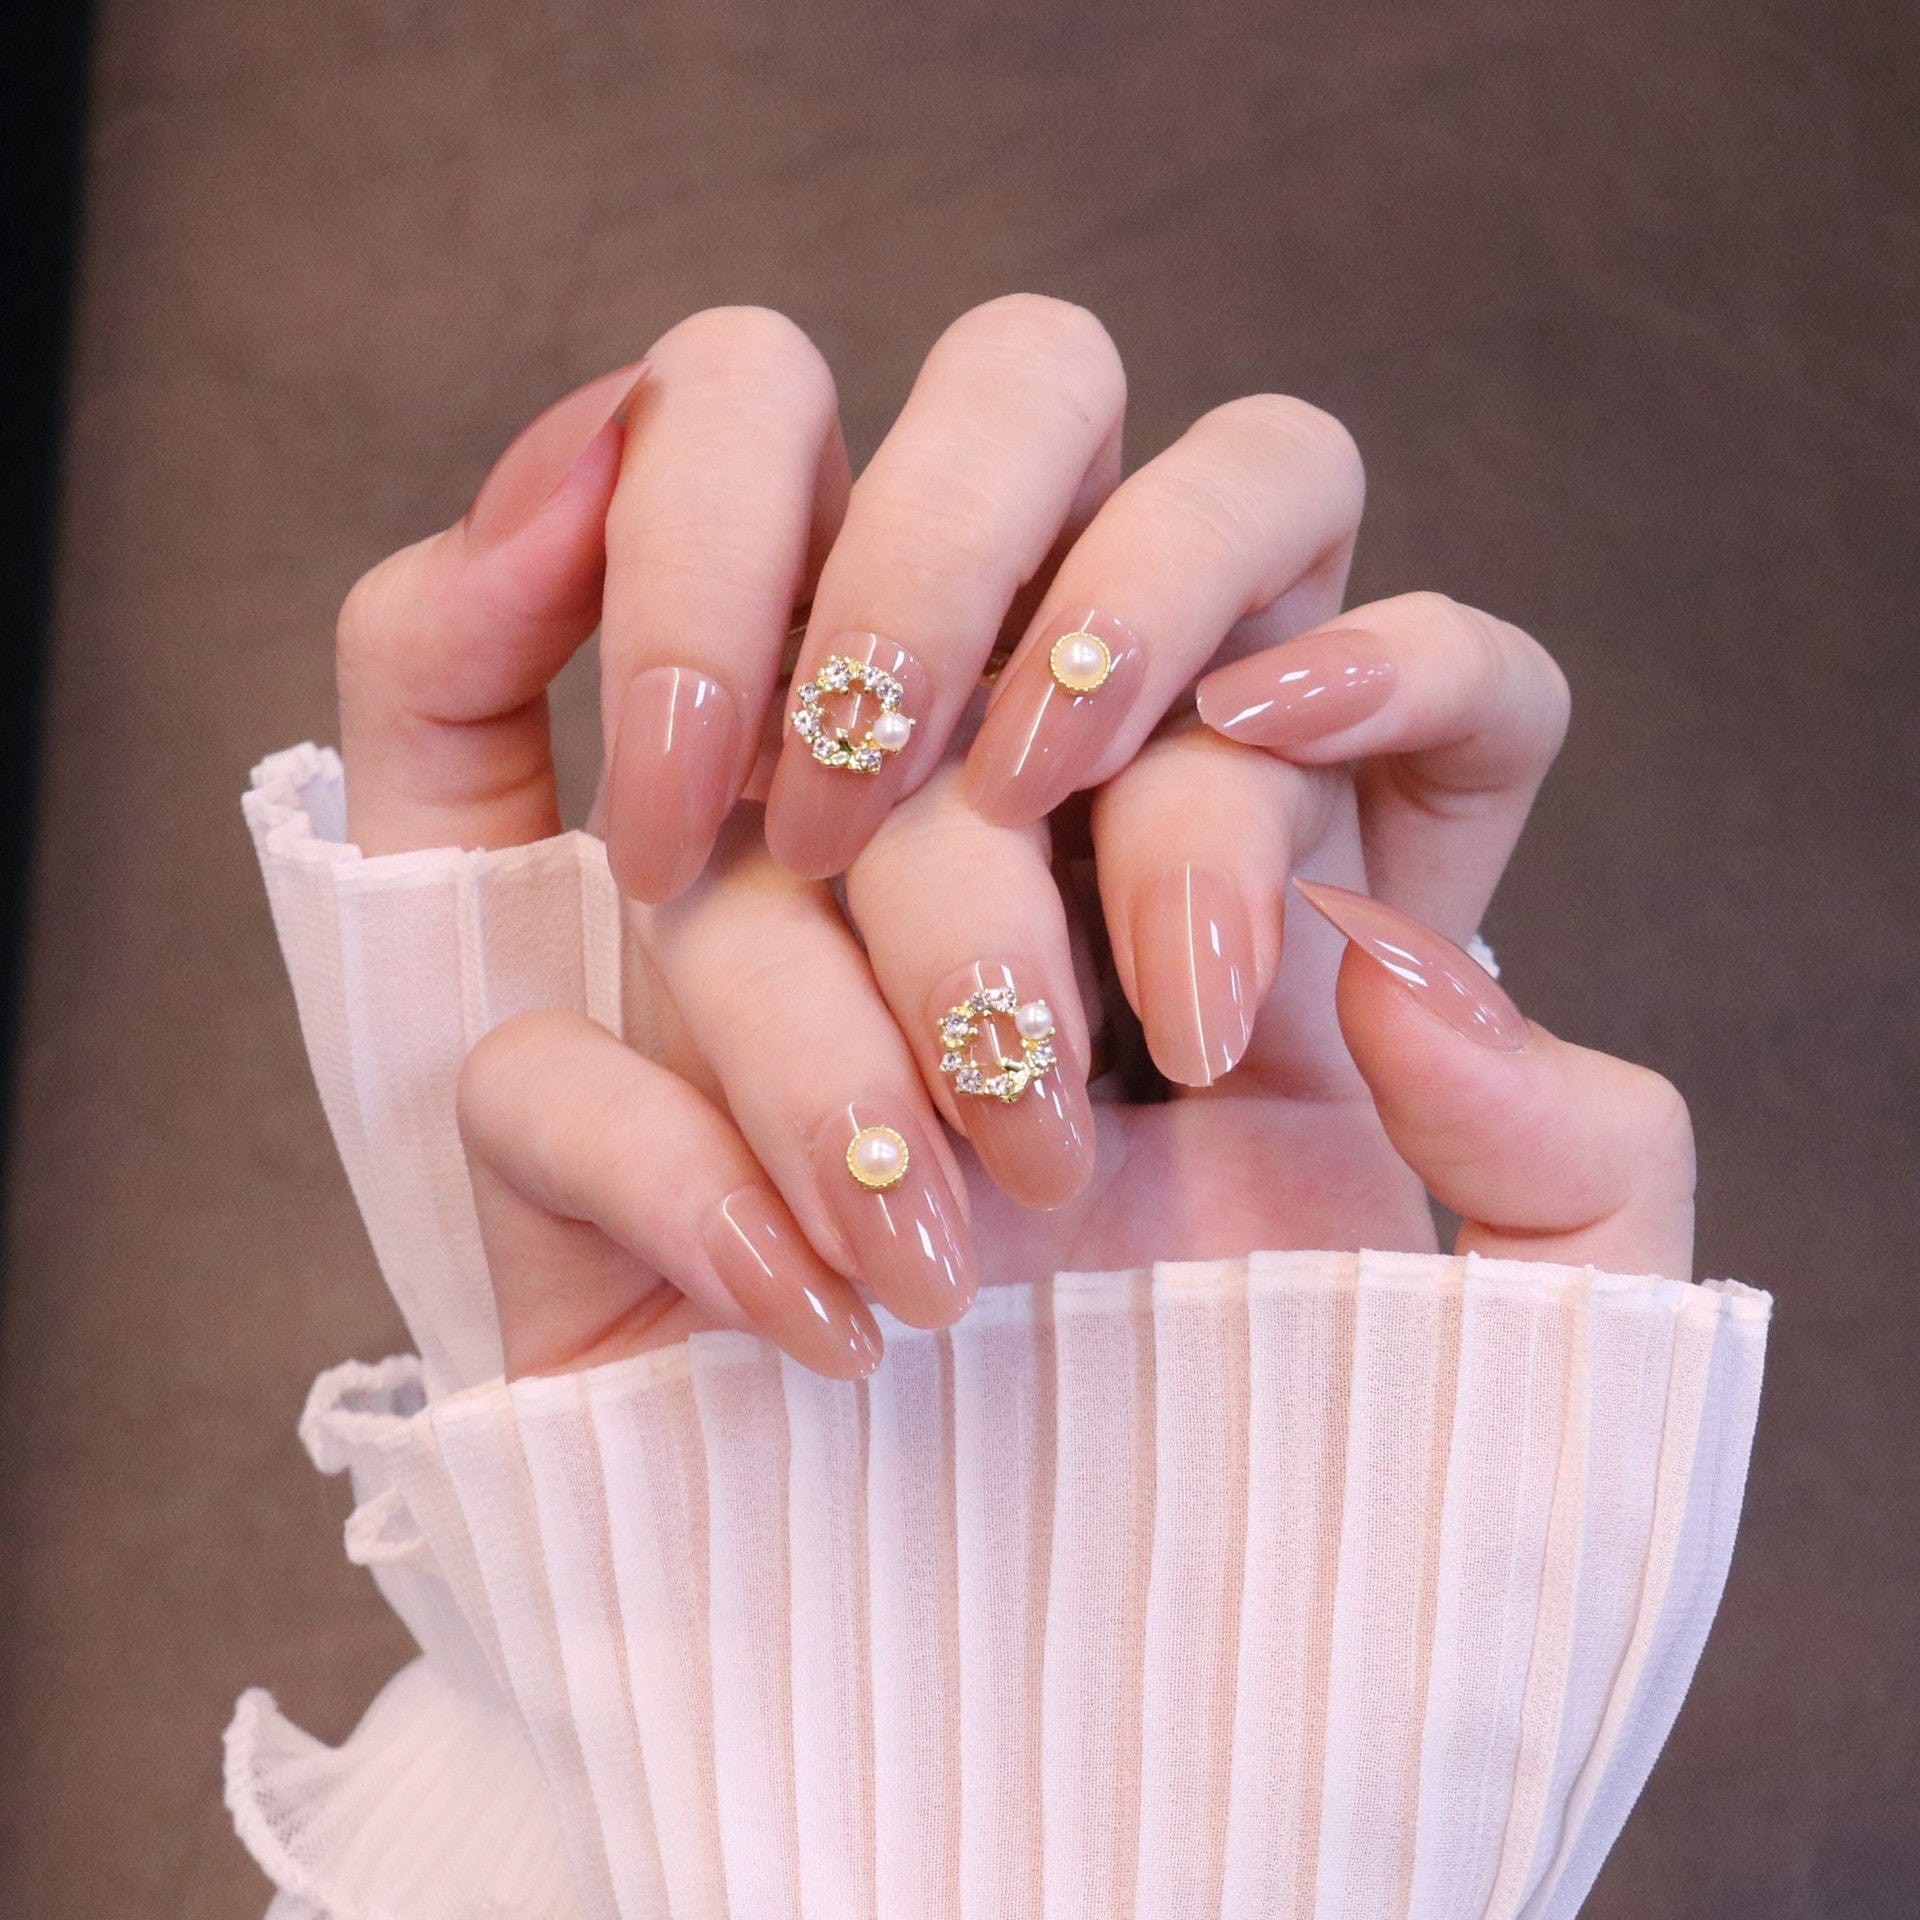 Medium Rounded Nude Press On Nails with Wreath Charm and Pearl